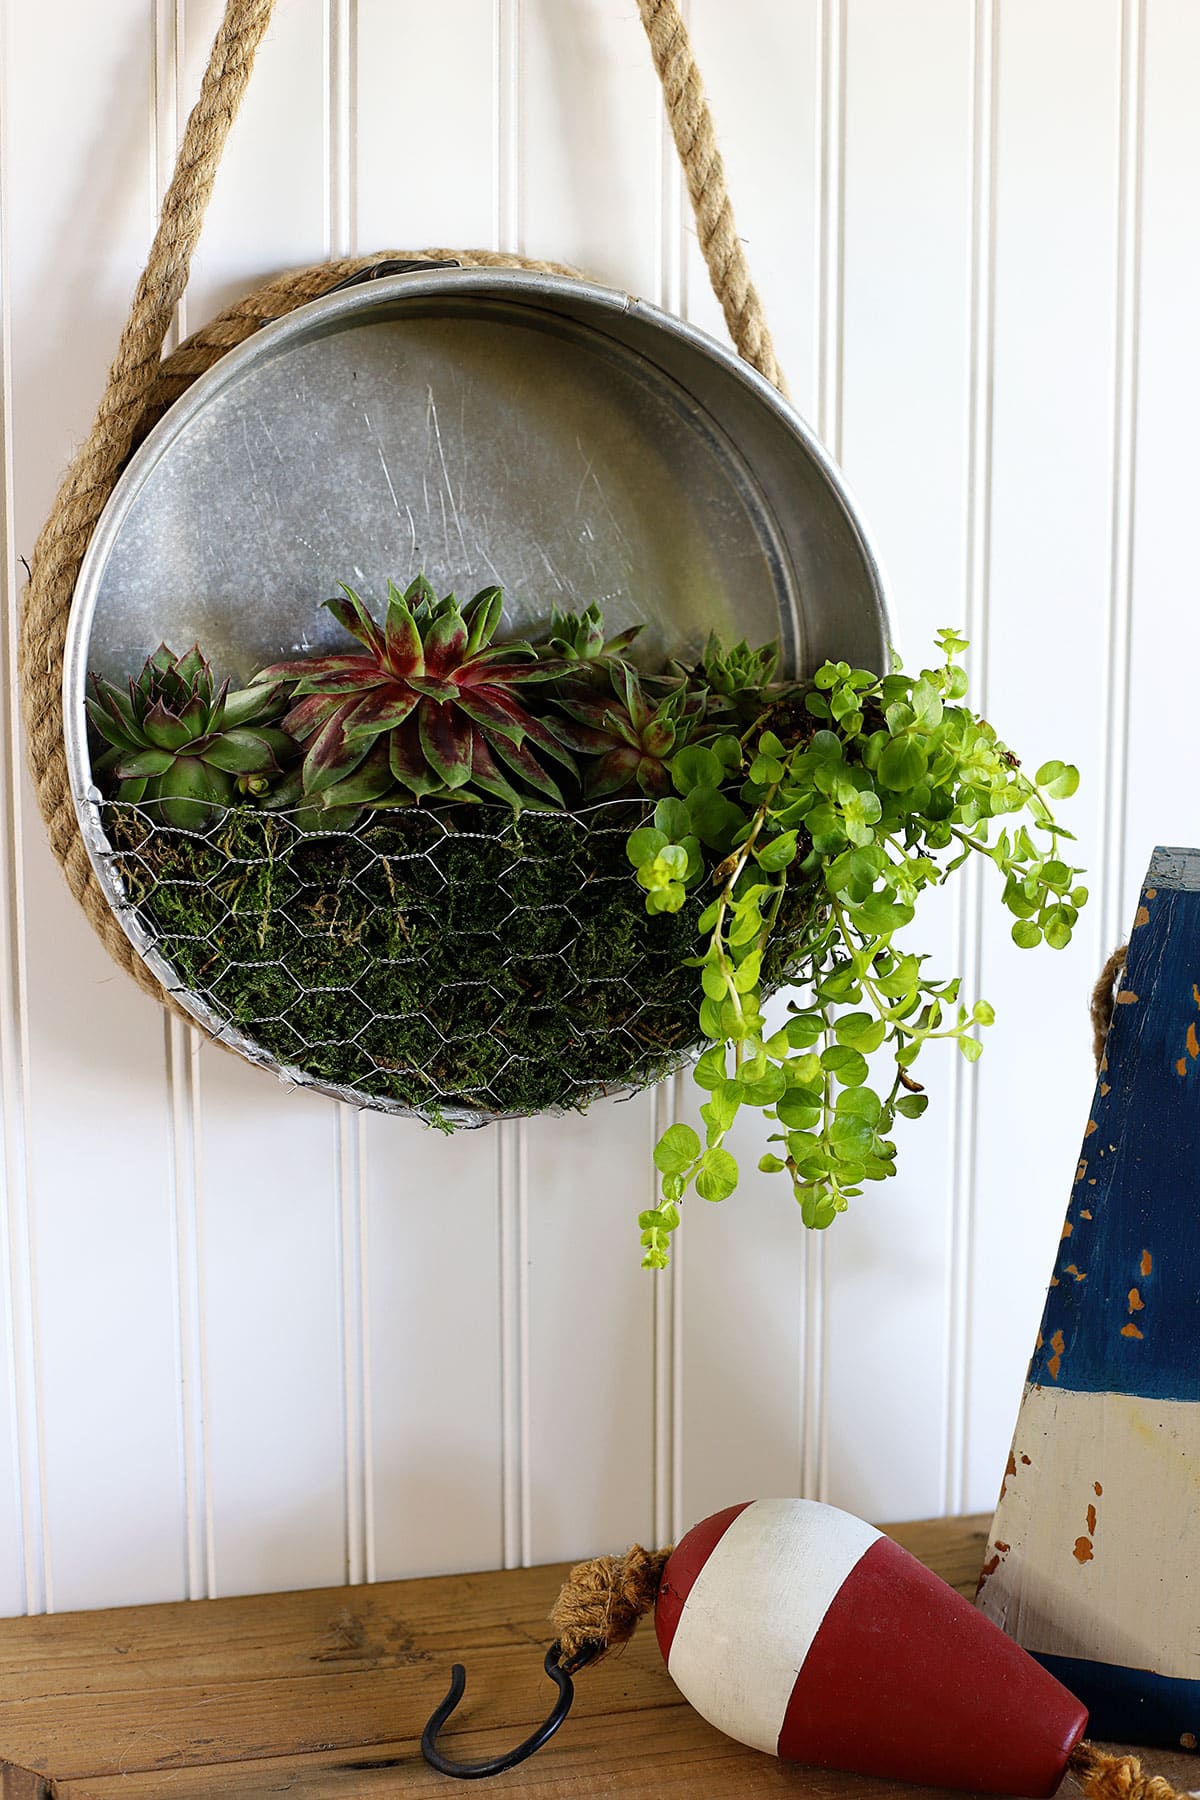 Learn how to repurpose a thrift store staple - the springform cake pan - into a nautical farmhouse style planter! Quick & easy thrift store makeover.